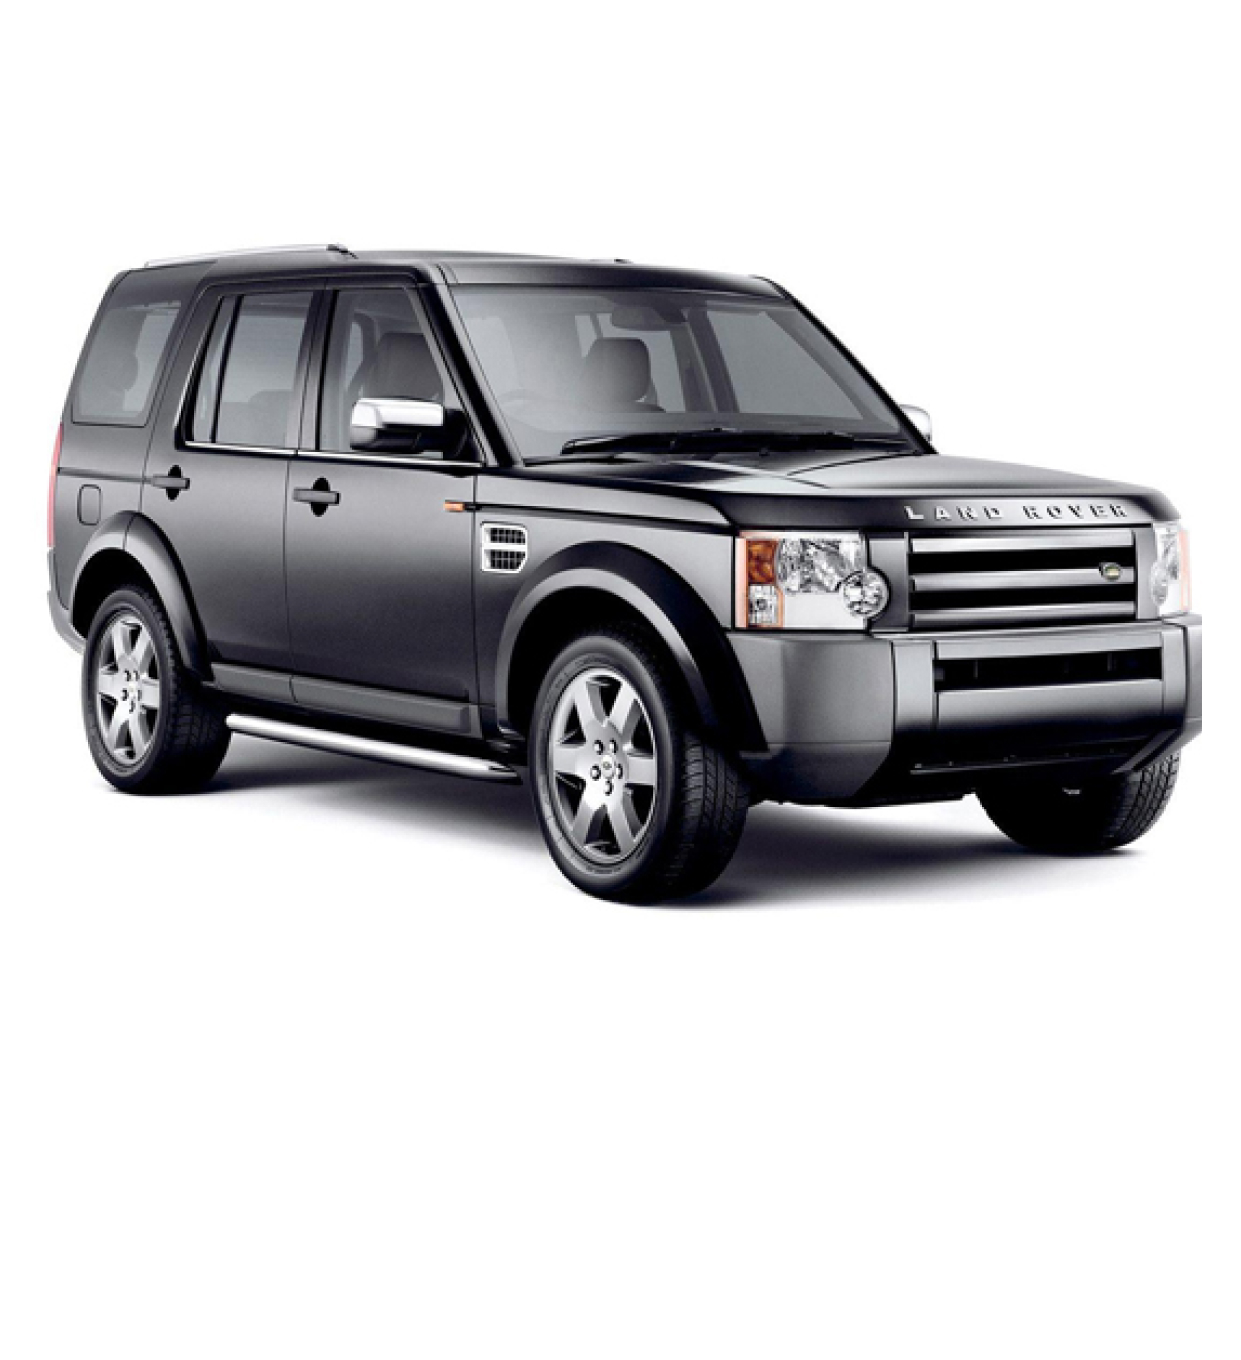 Land Rover Discovery III  4.4 AT 295 Hp 2004 - 2009